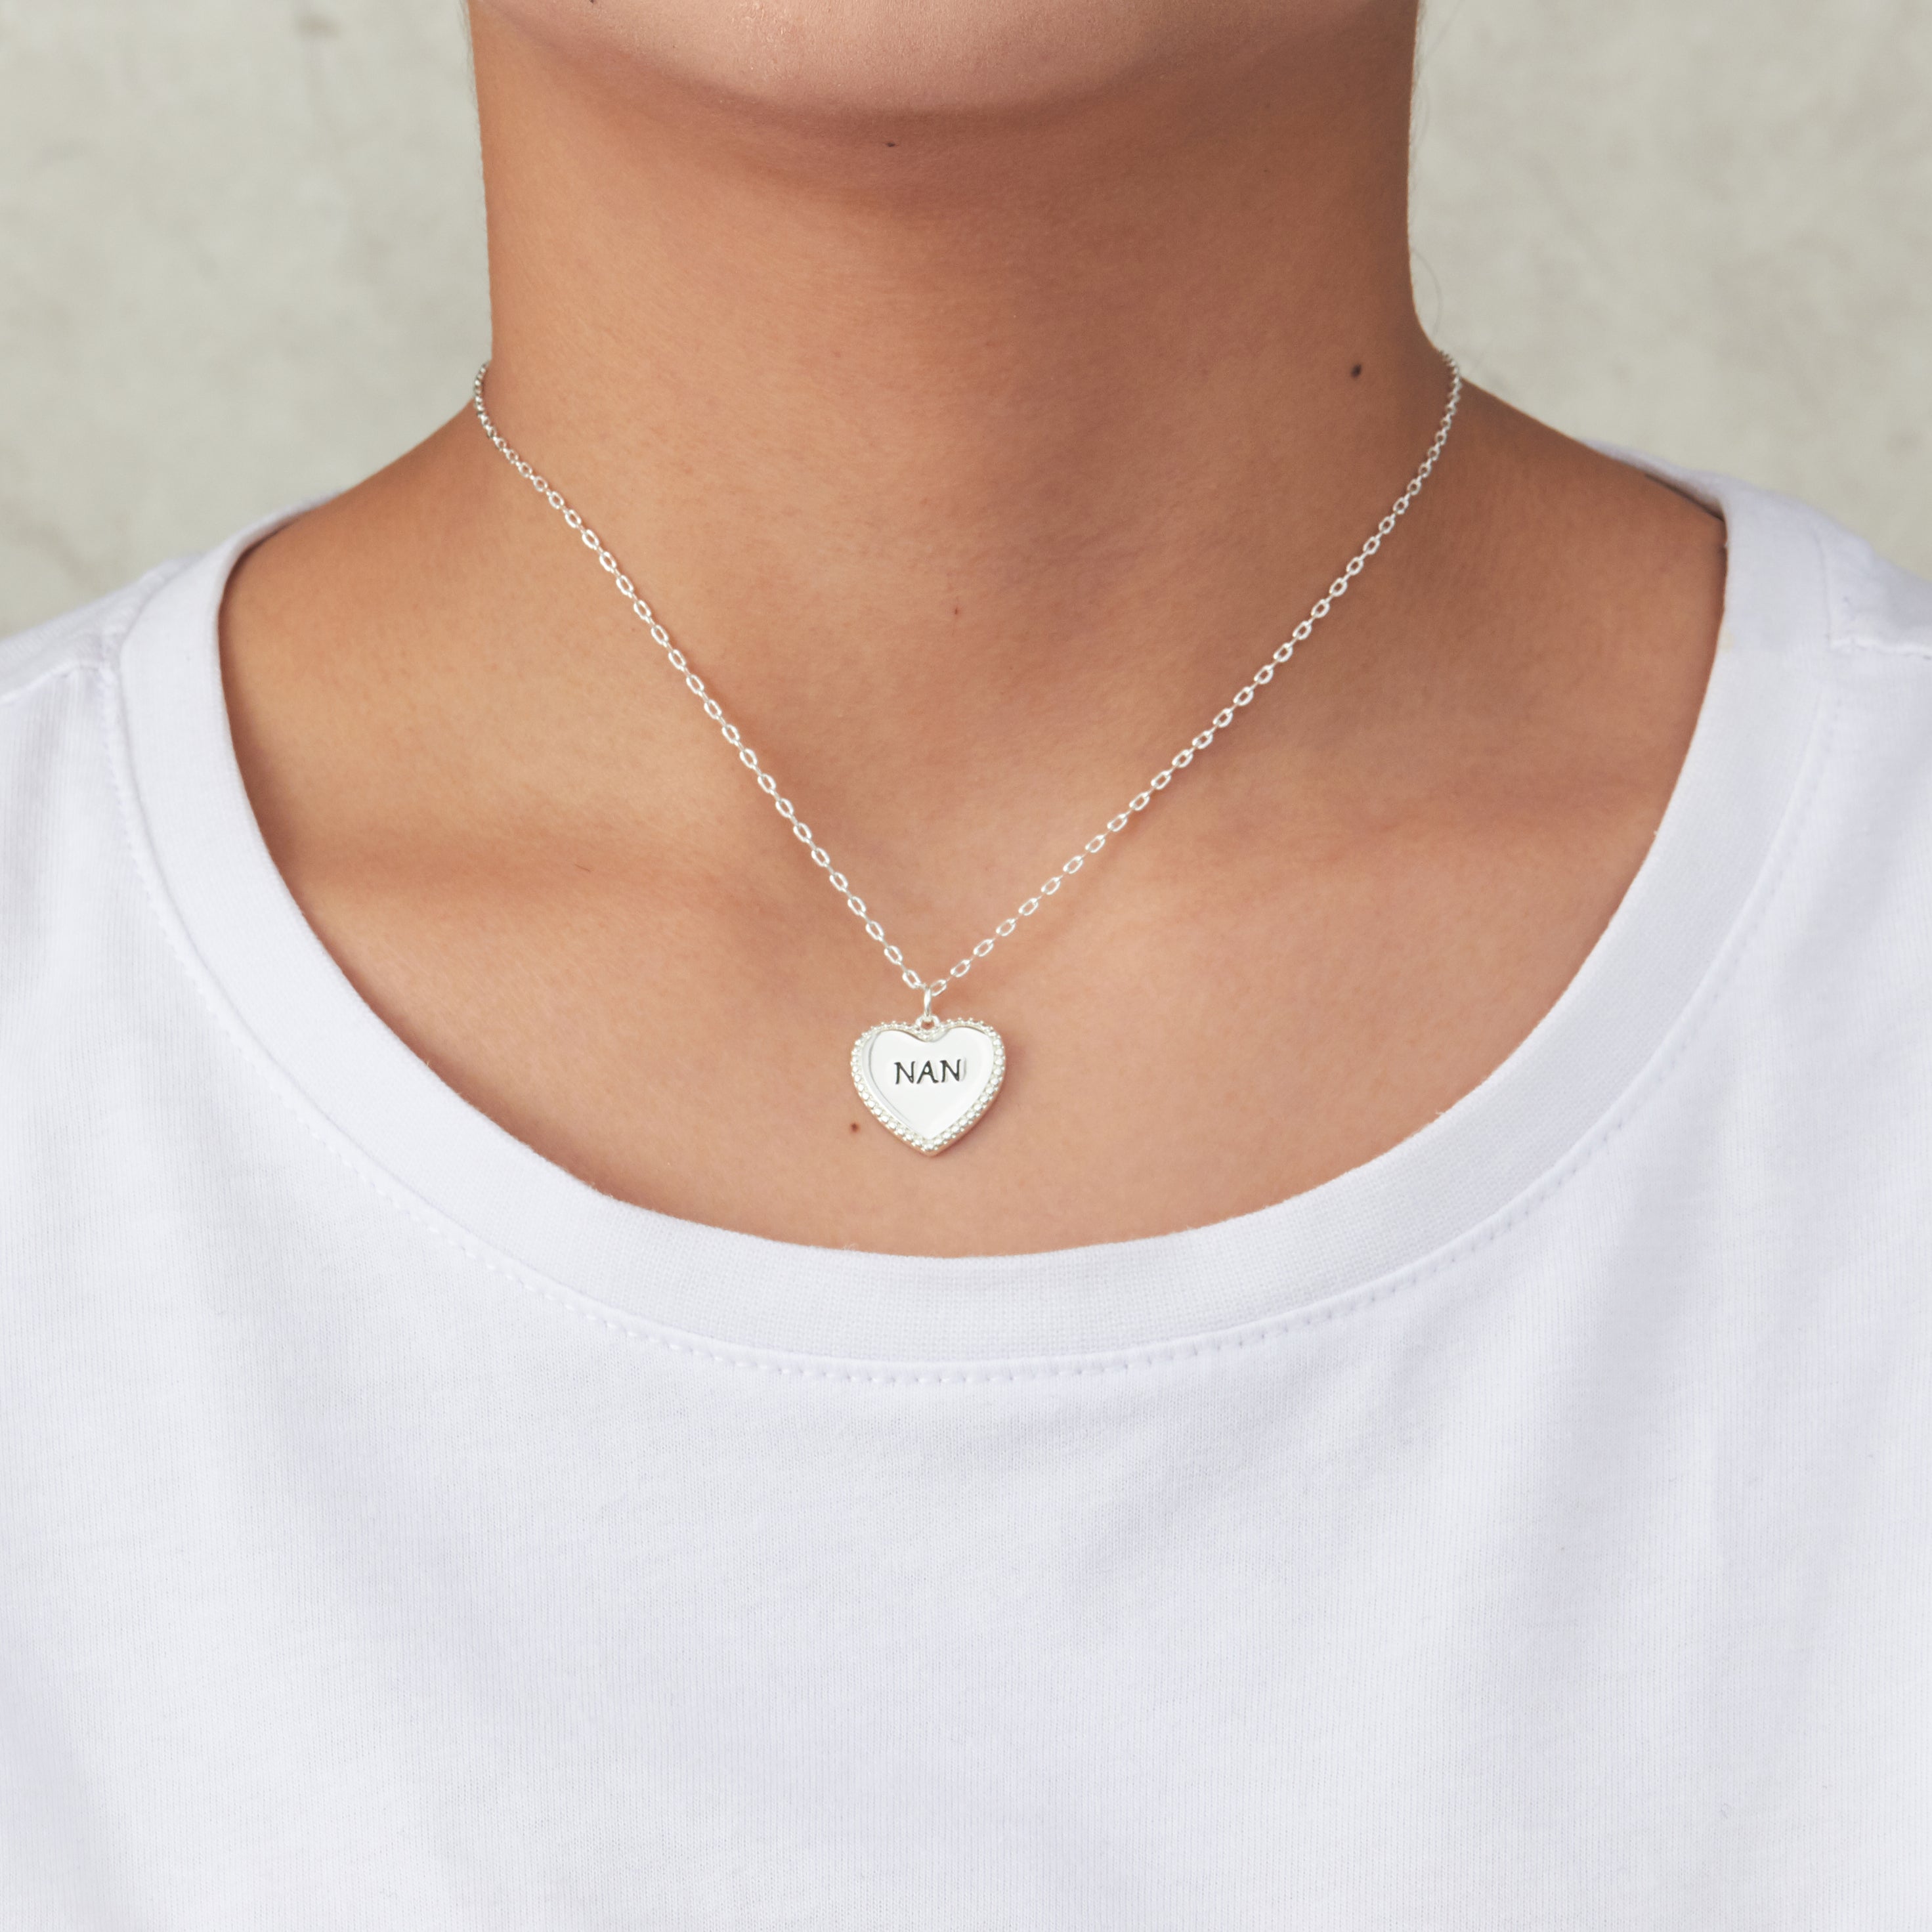 Silver Plated Filigree Heart Nan Necklace